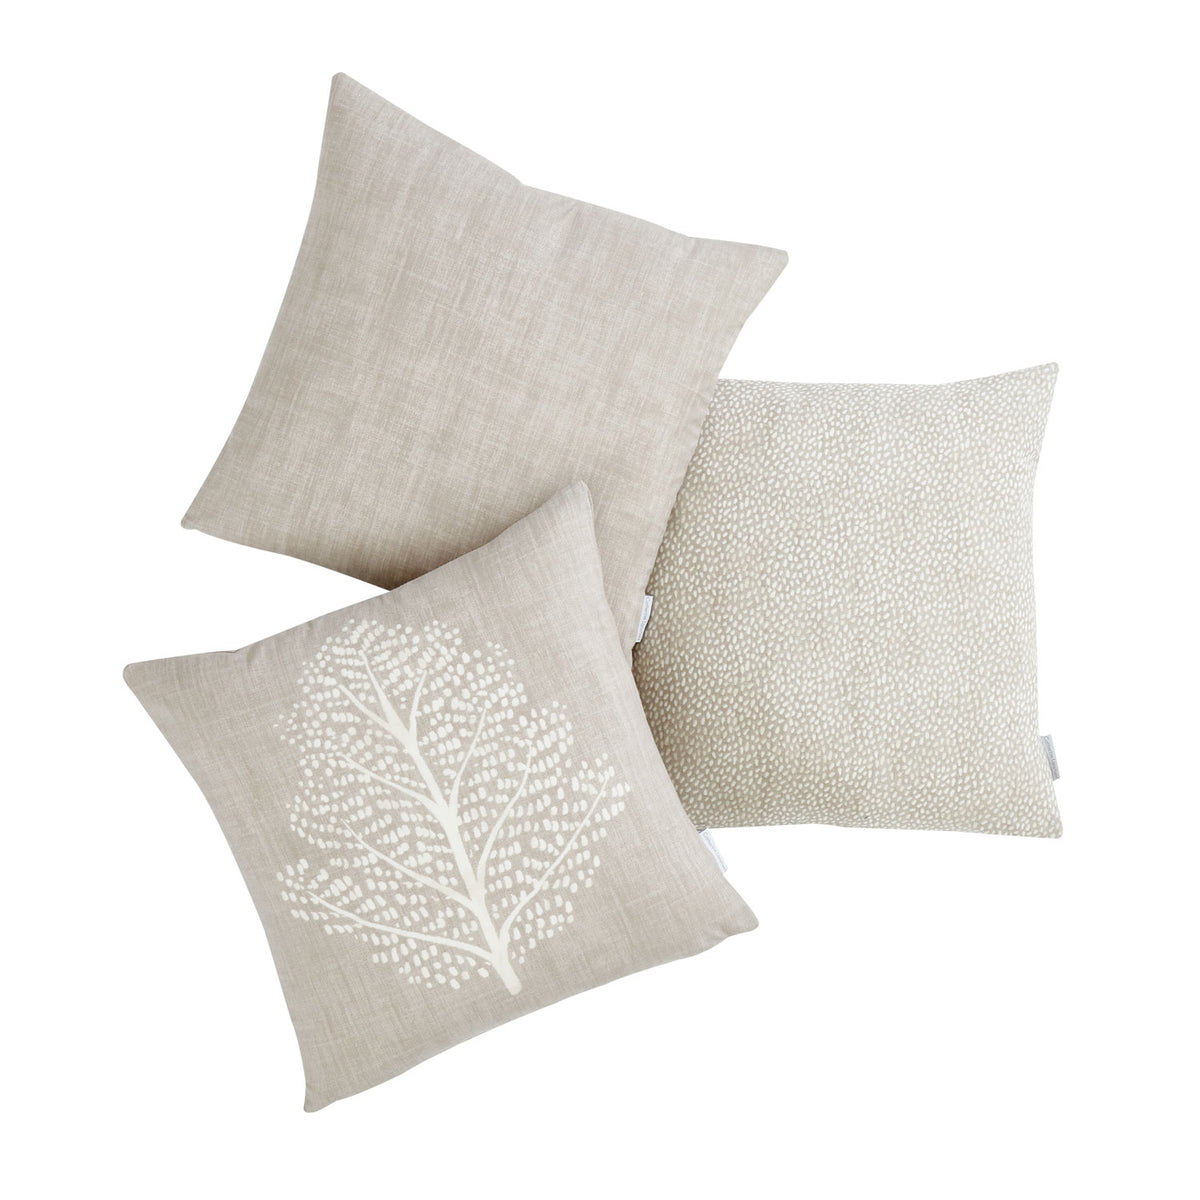 Alder Tree Pack of 3 Cushion Covers - Natural